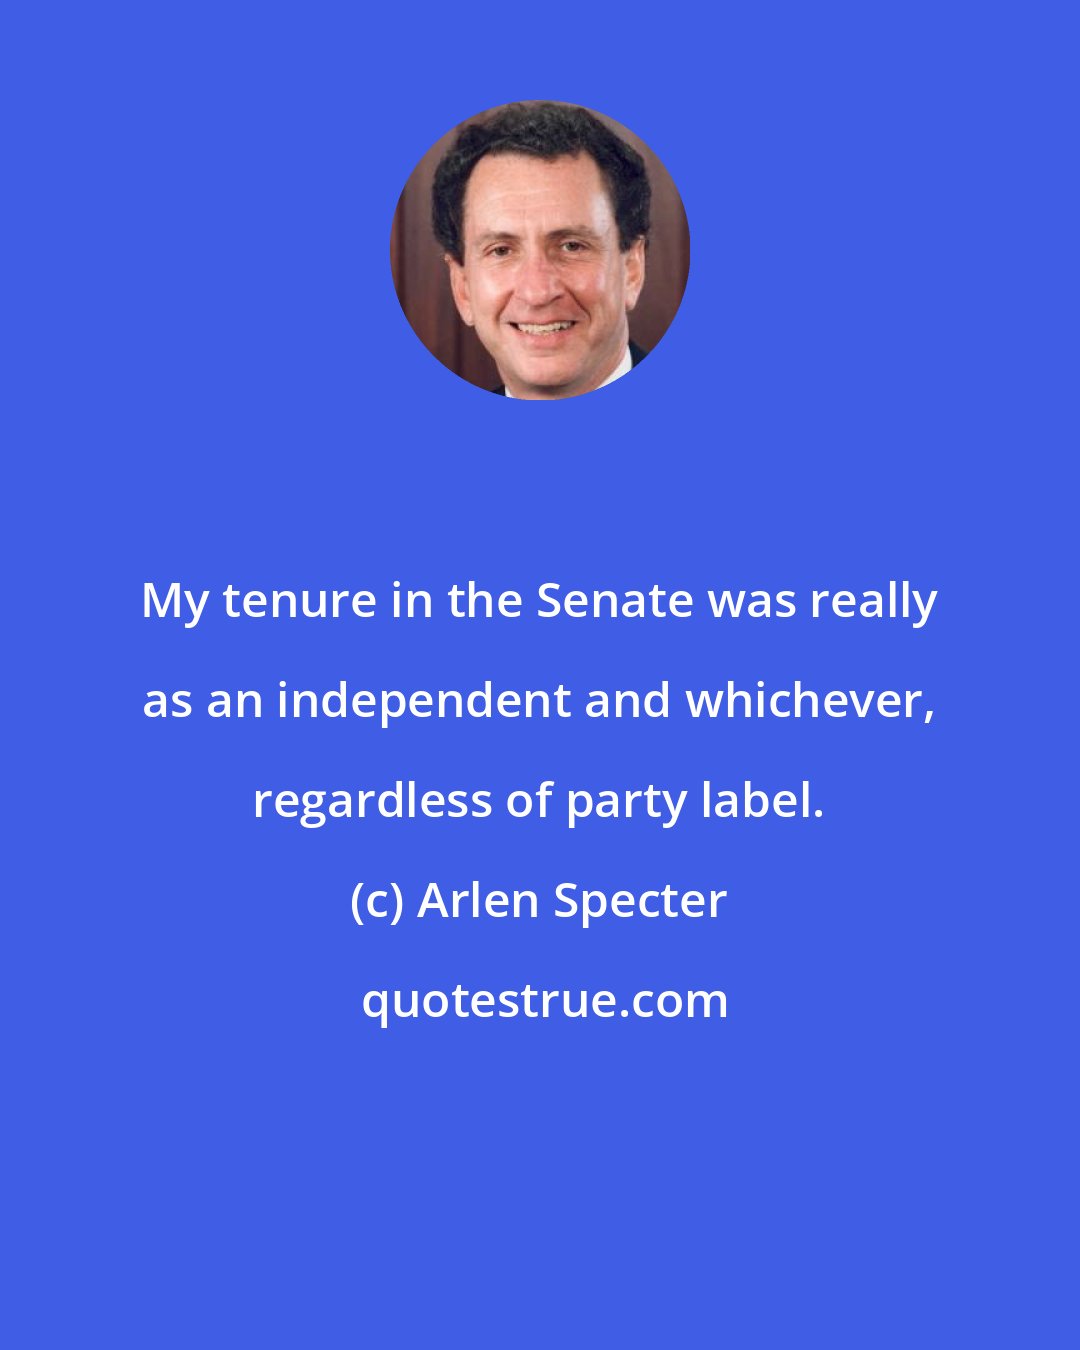 Arlen Specter: My tenure in the Senate was really as an independent and whichever, regardless of party label.